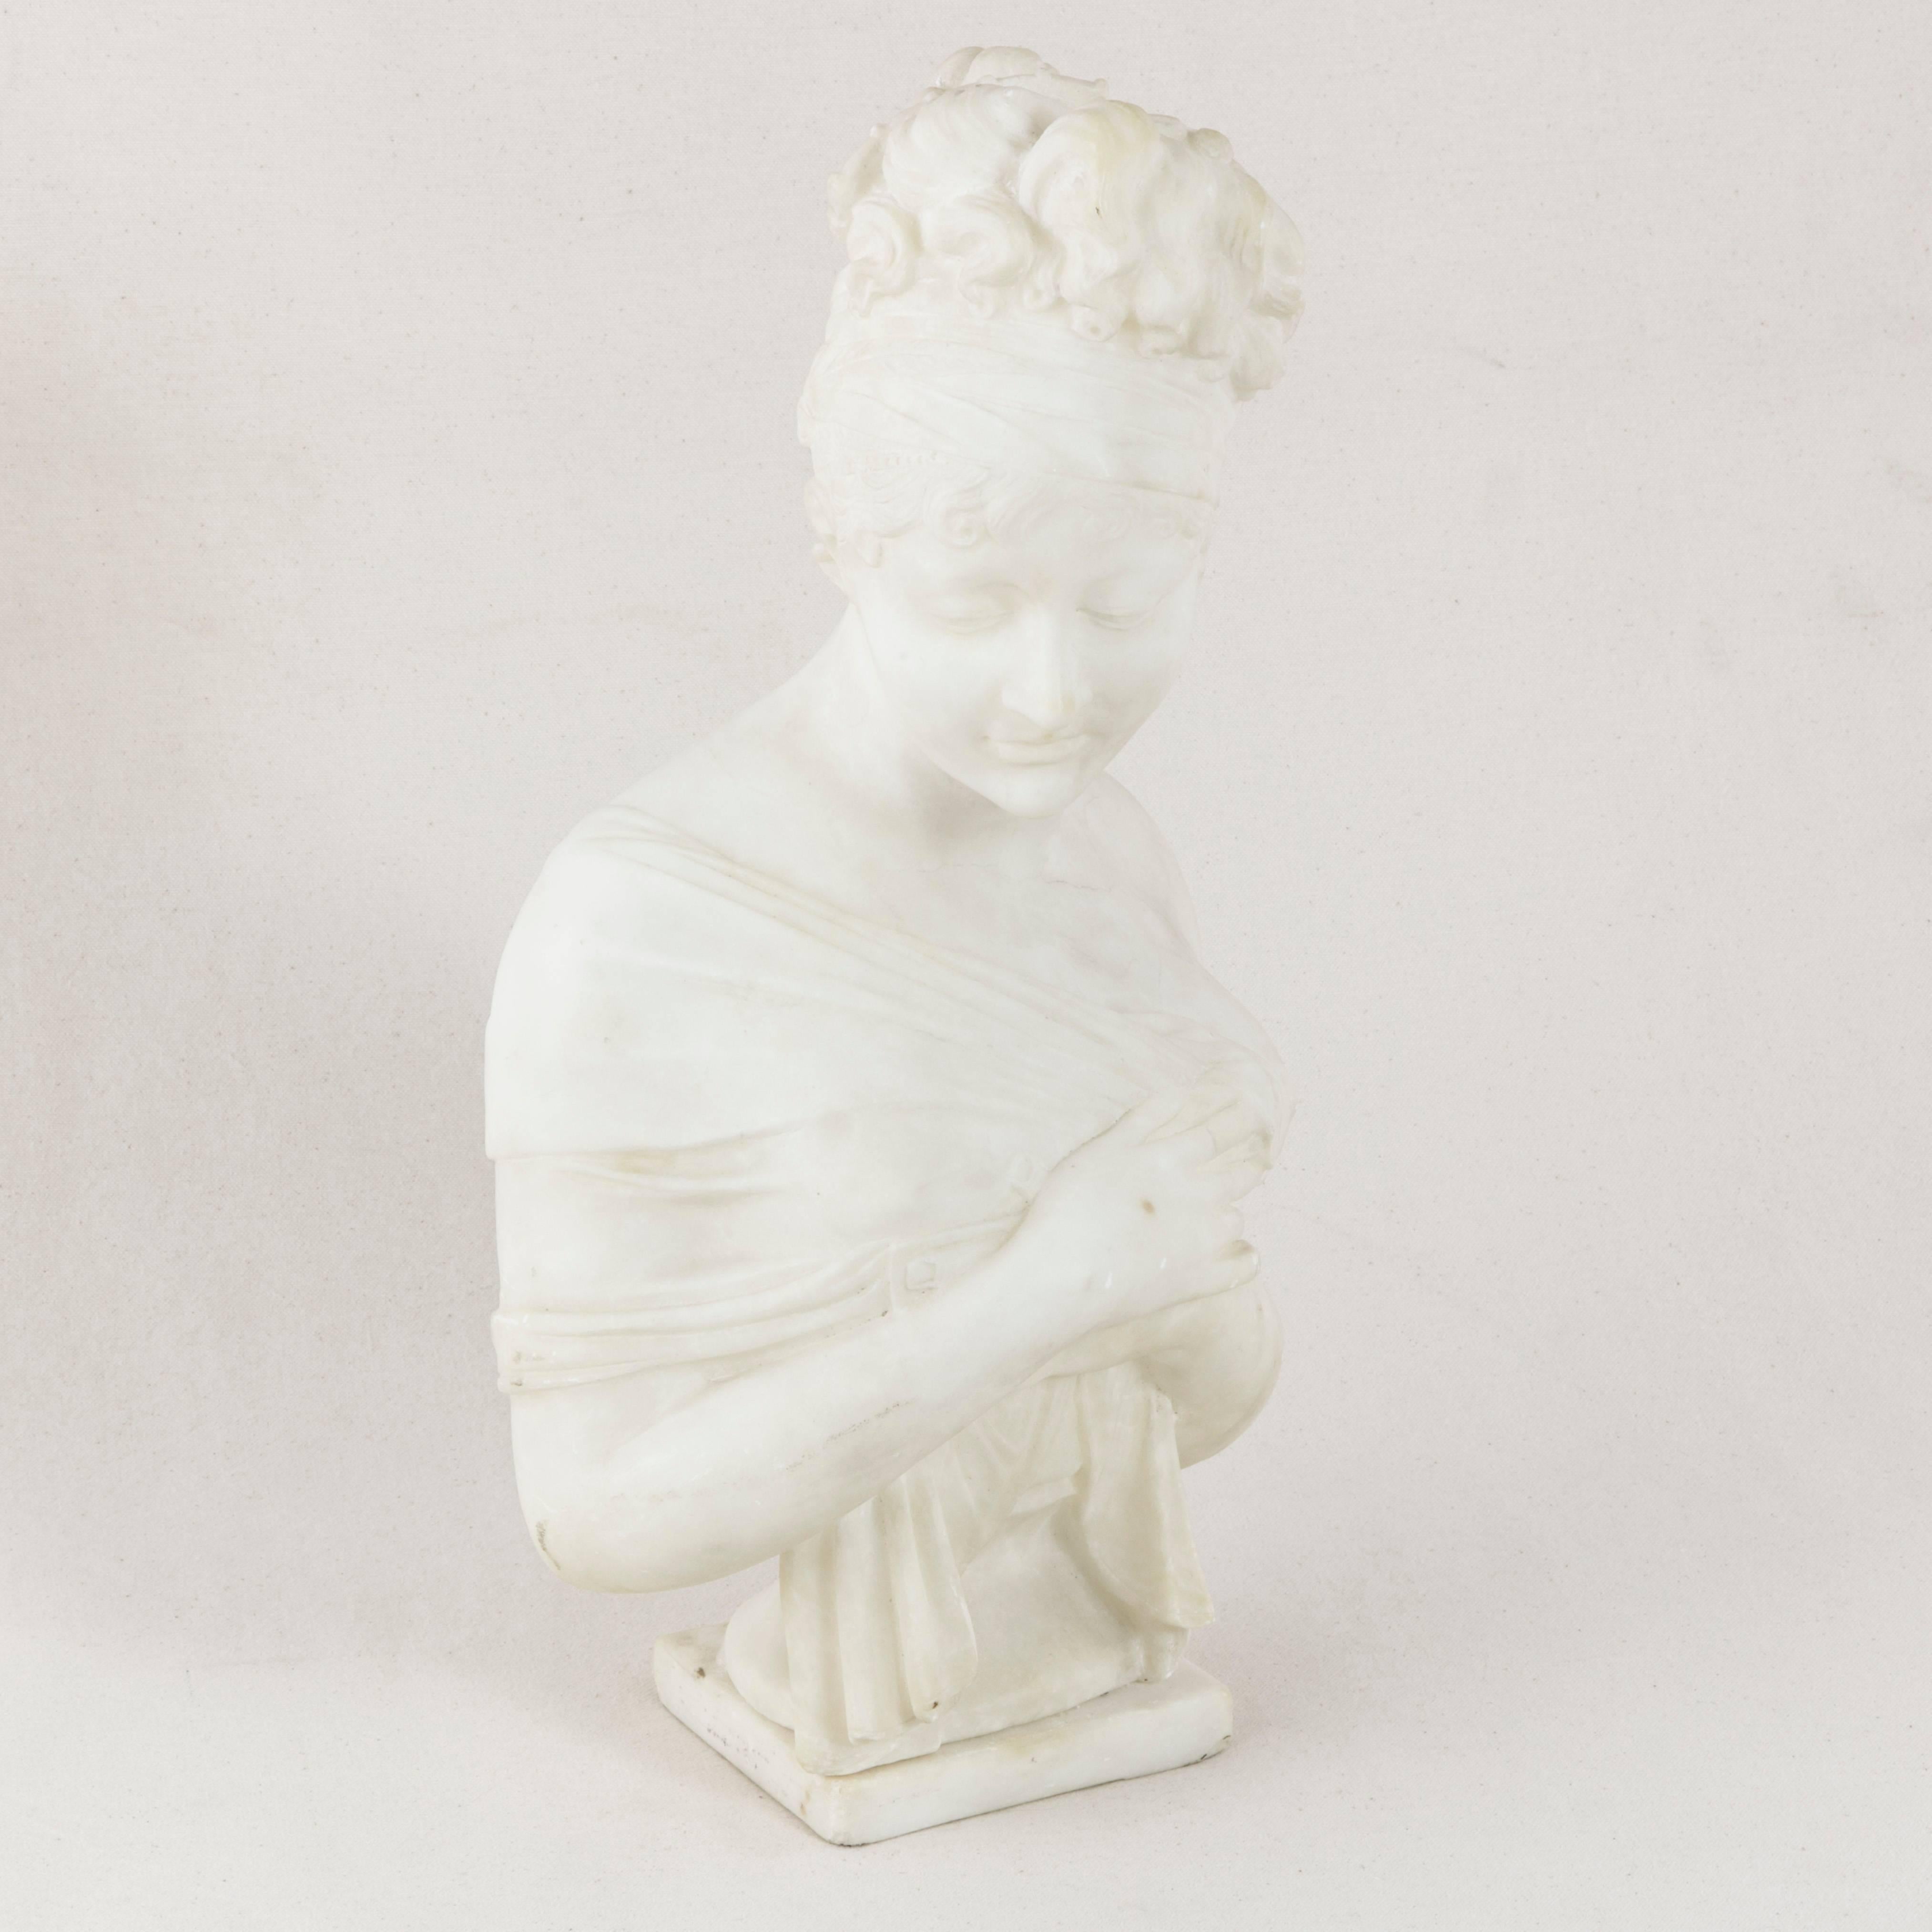 This turn of the 20th century solid marble bust depicts celebrated French beauty, Juliette Recamier, close friend of Josephine de Beauharnais, the first wife of Napoleon Bonaparte. Closely associated with the First Empire in France, Madame Recamier